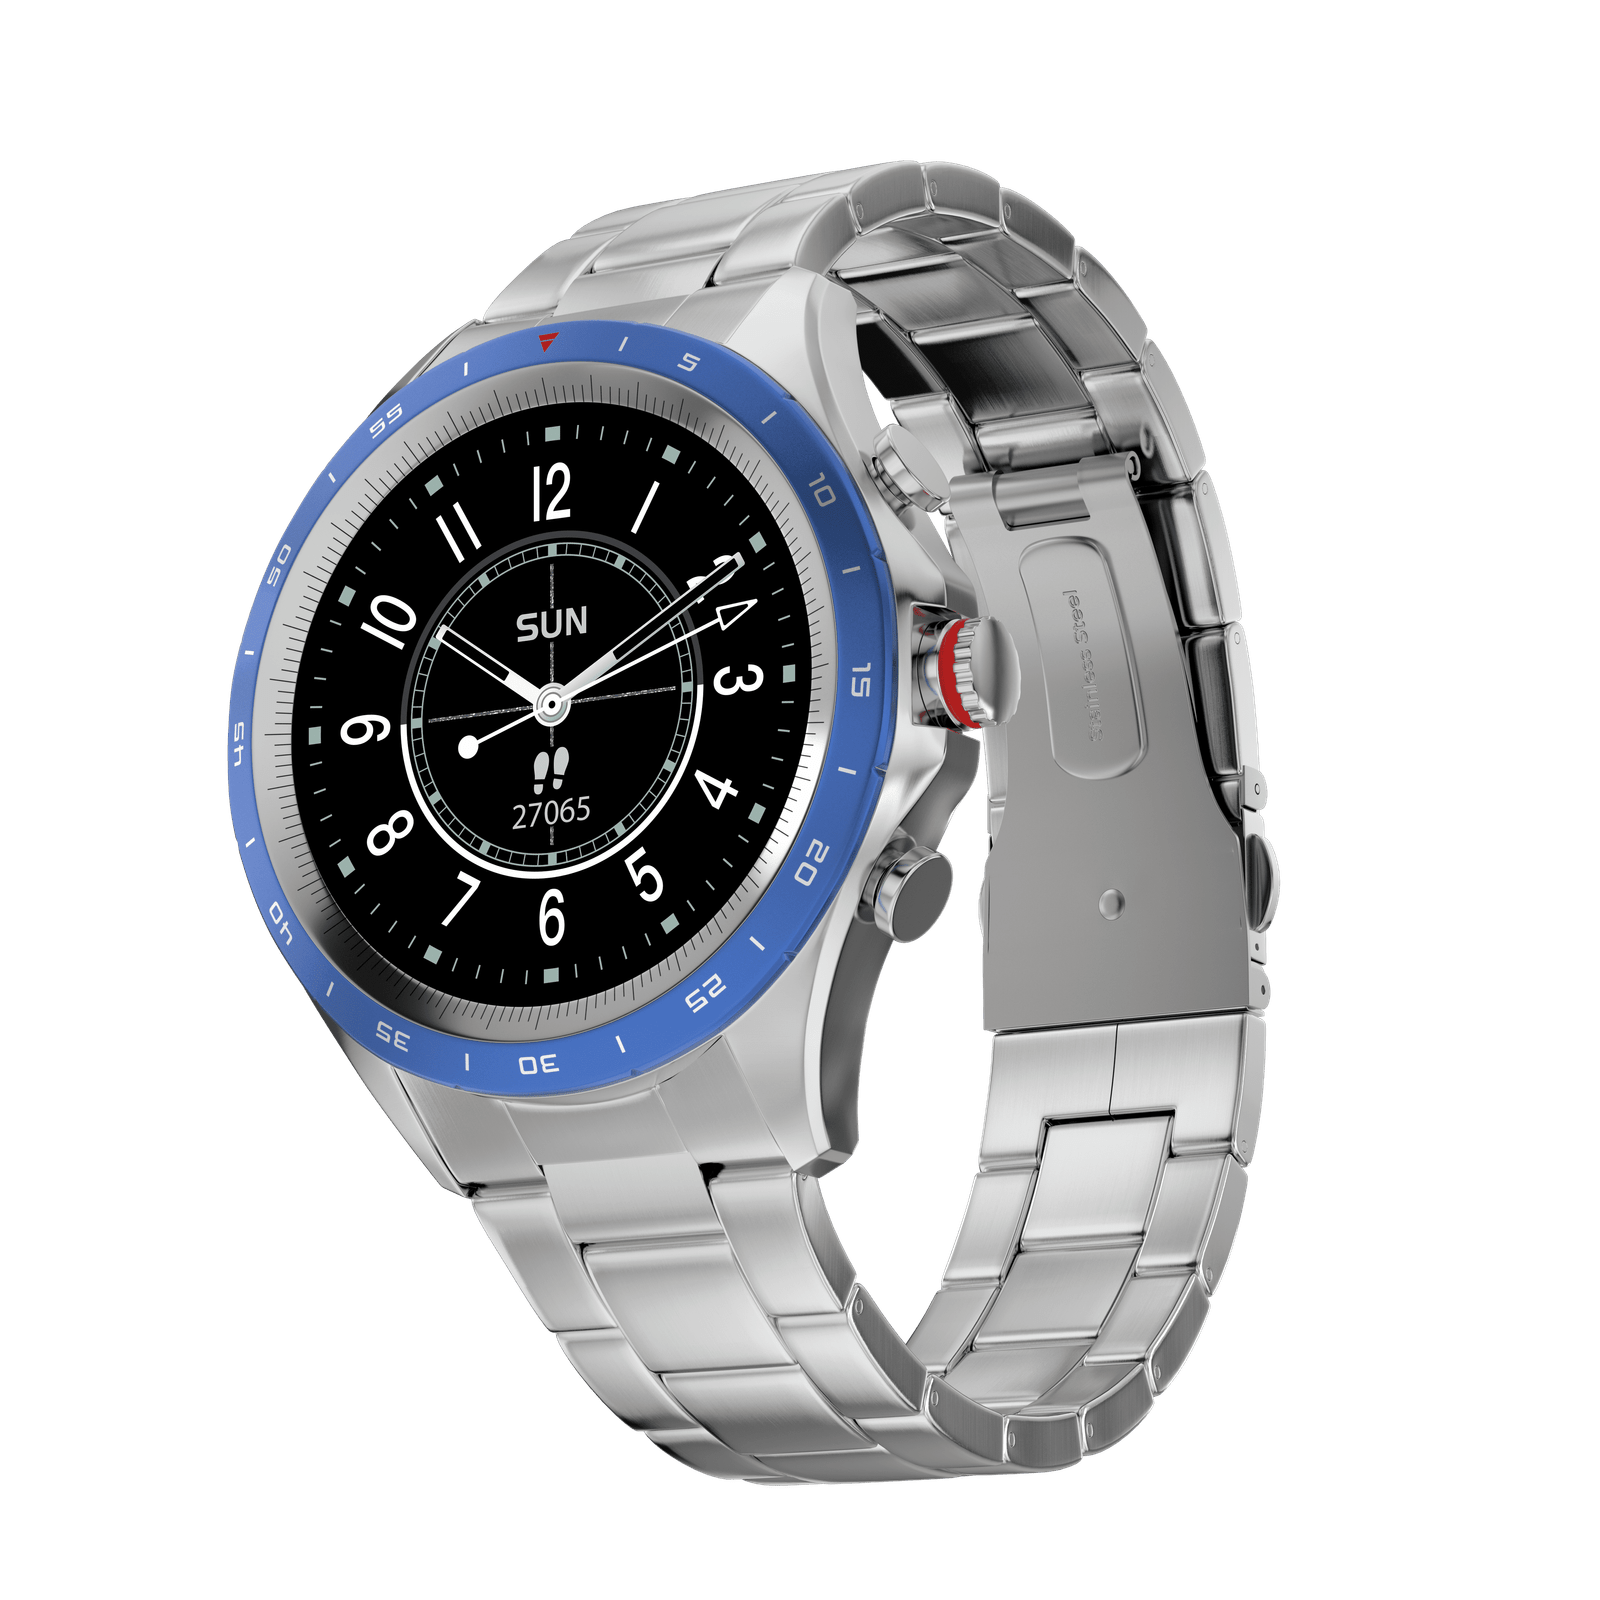 Fire-Boltt launches two new smart watches with Bluetooth calling